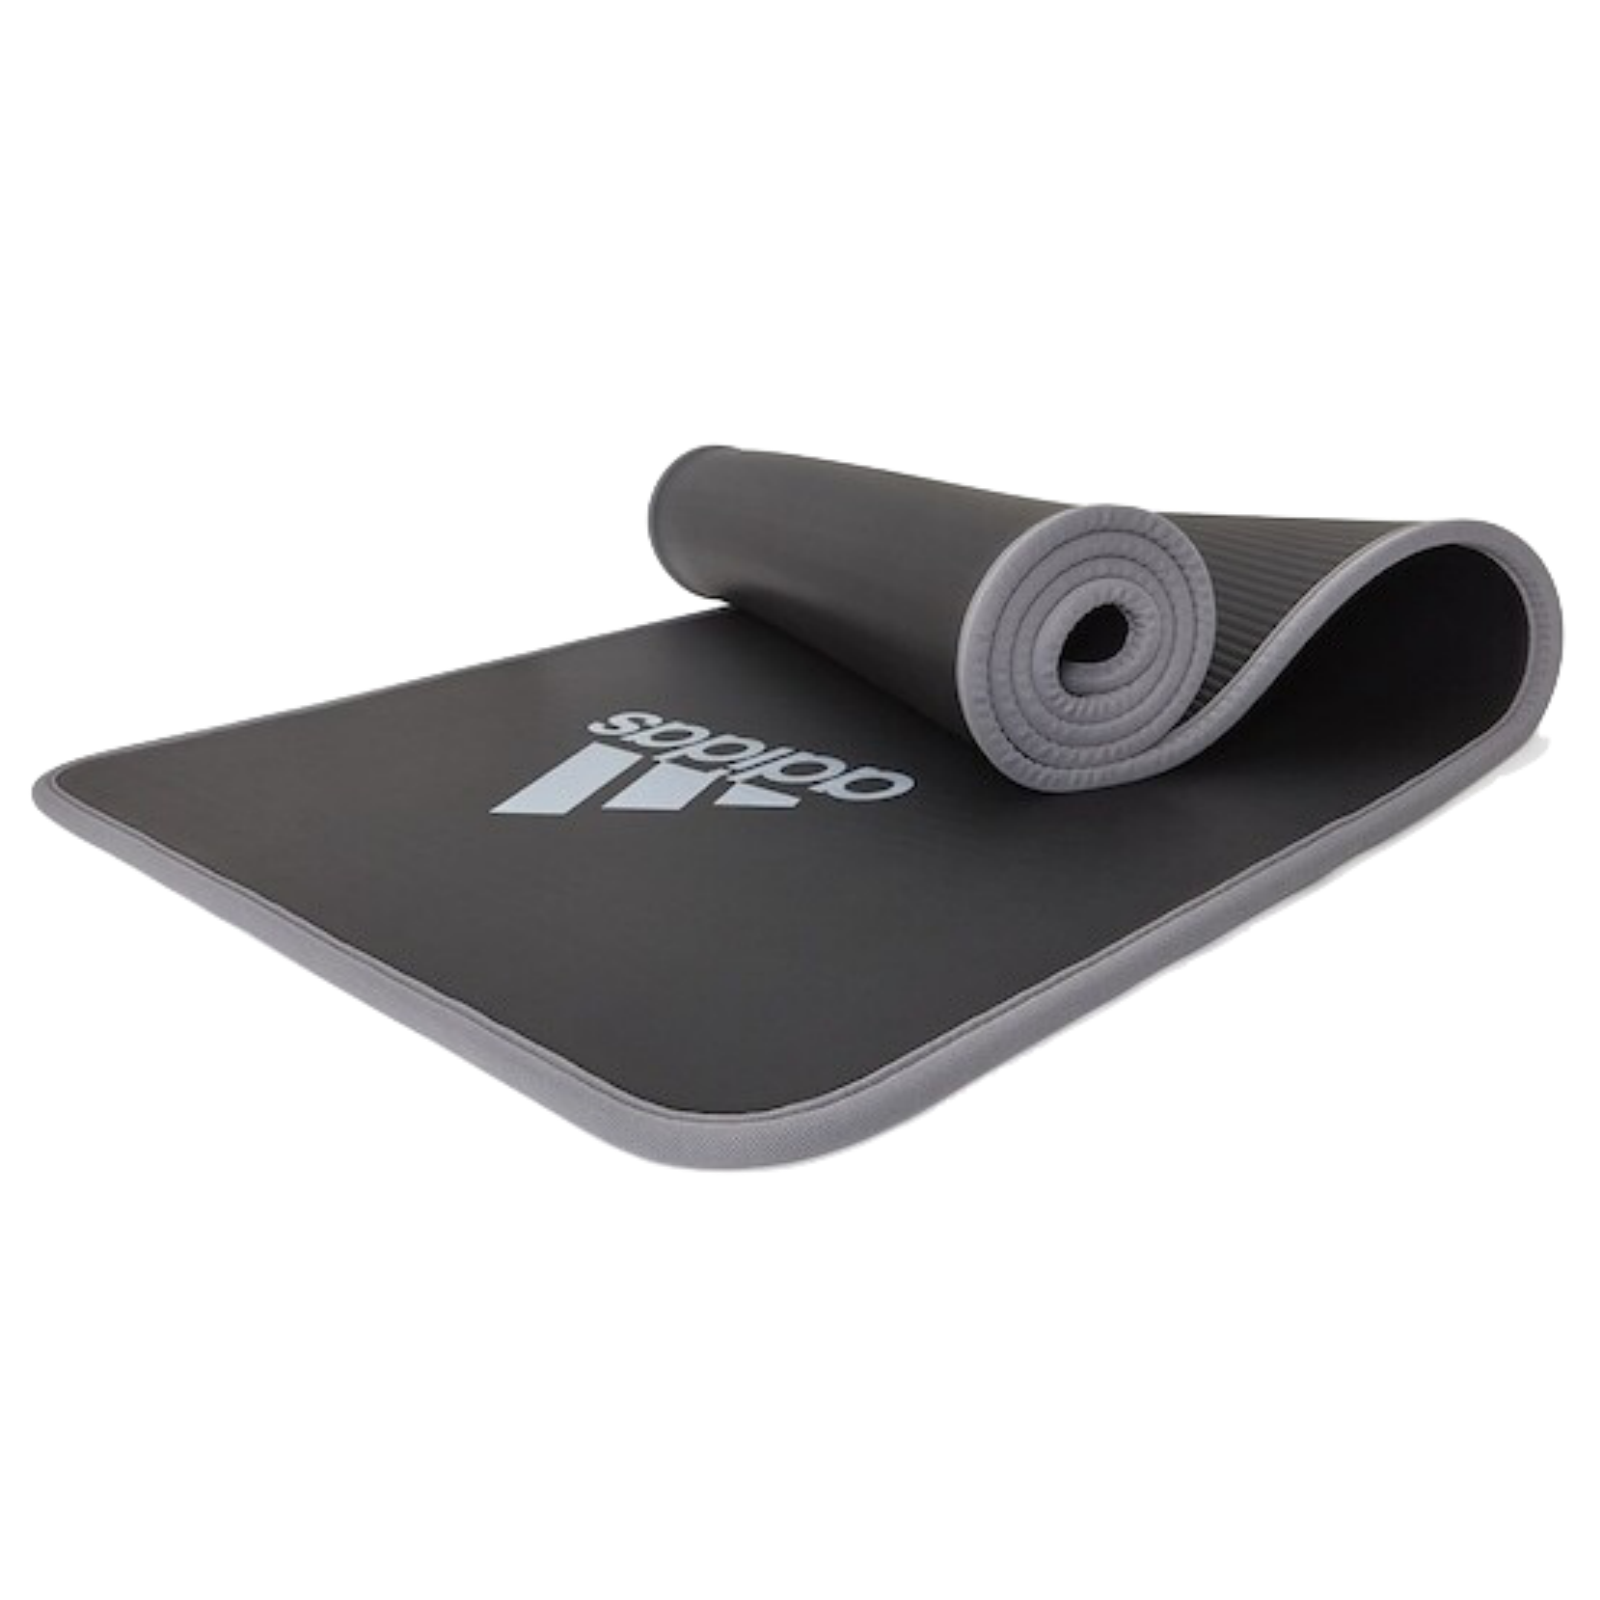 15 Minute Adidas workout mat for Weight Loss